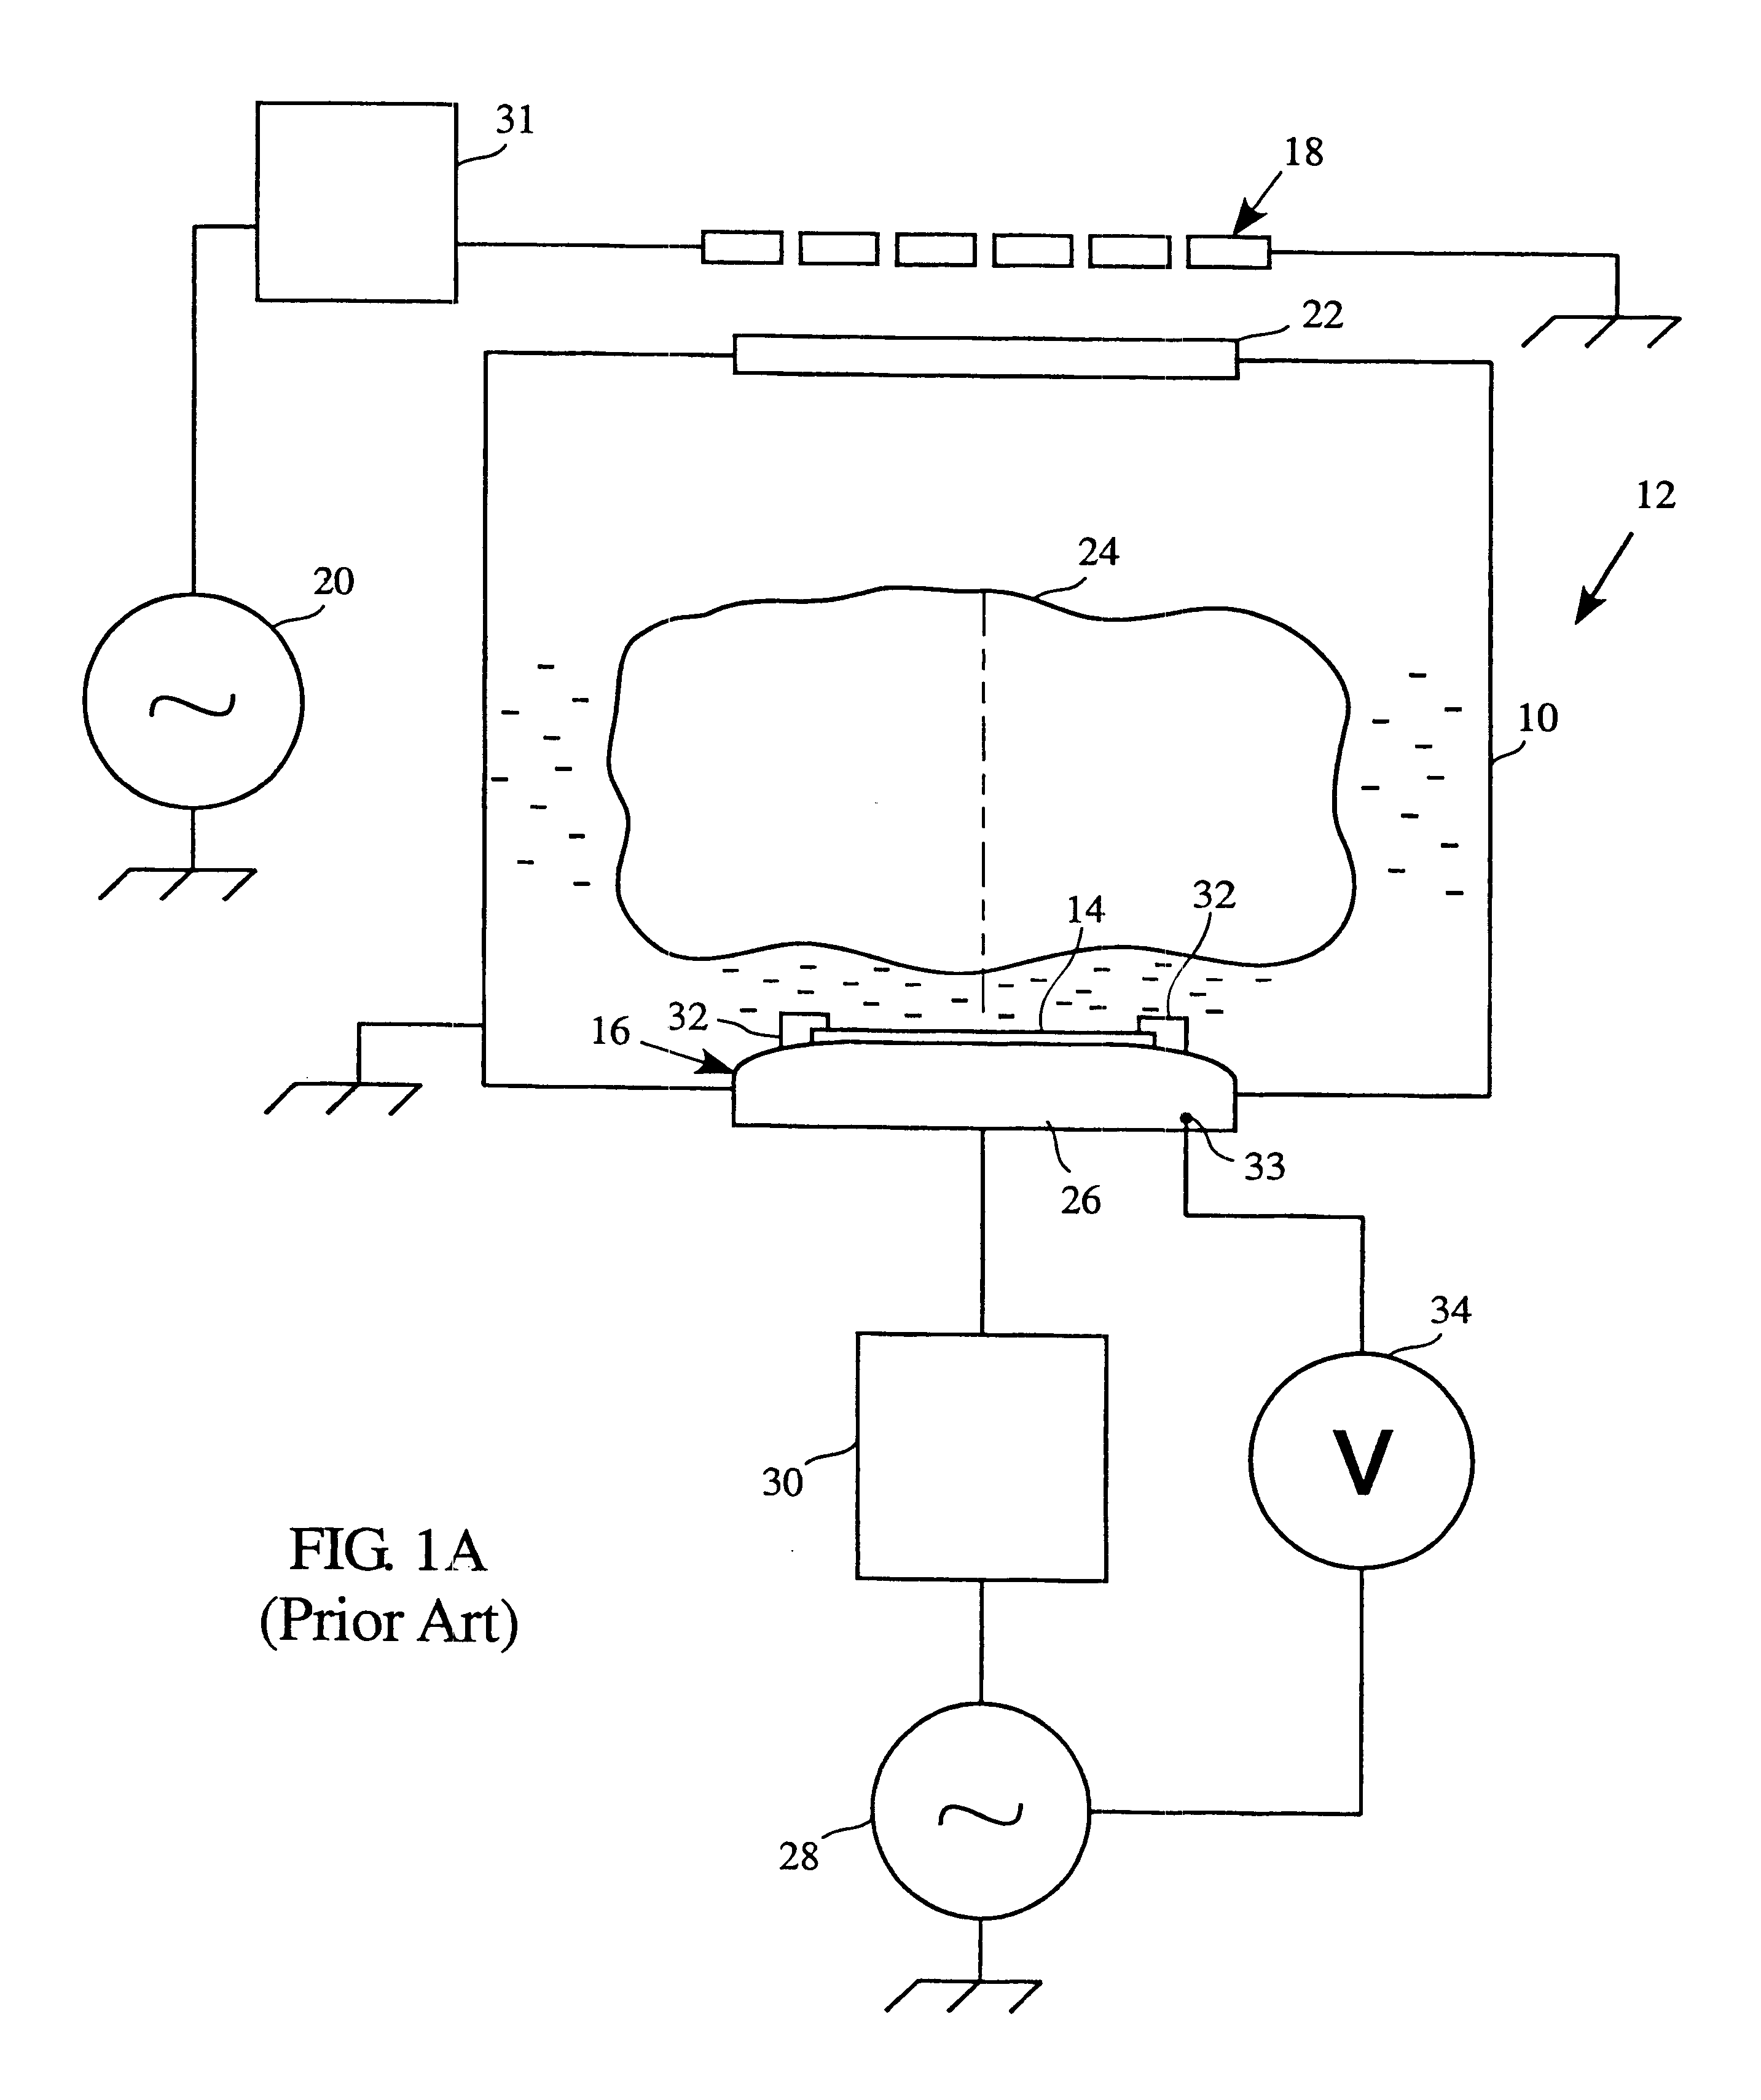 Voltage control sensor and control interface for radio frequency power regulation in a plasma reactor